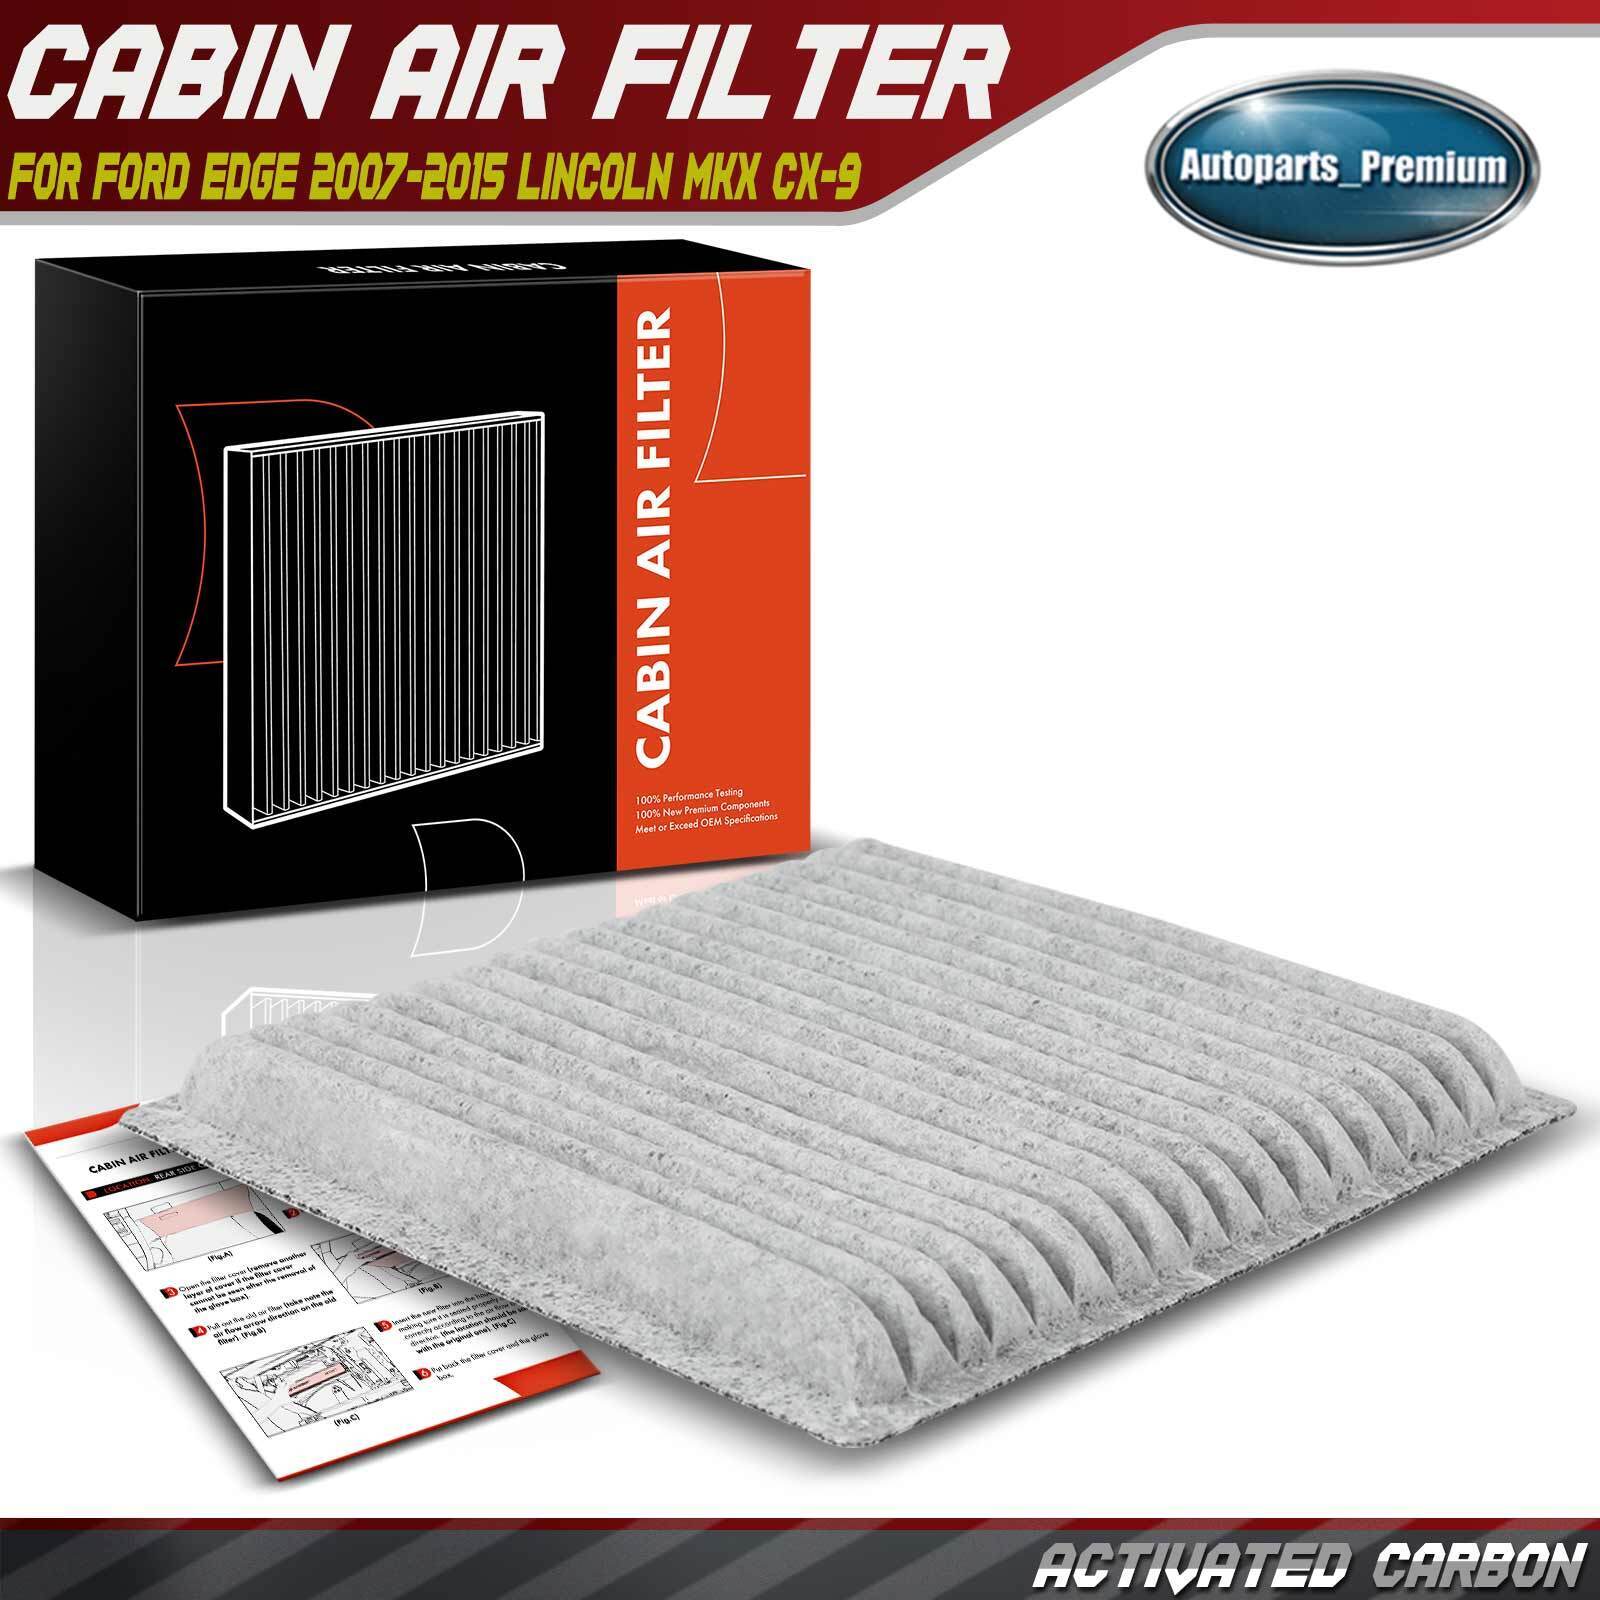 Activated Carbon Cabin Air Filter for Ford Edge Mazda CX-9 2007-2015 Lincoln MKX